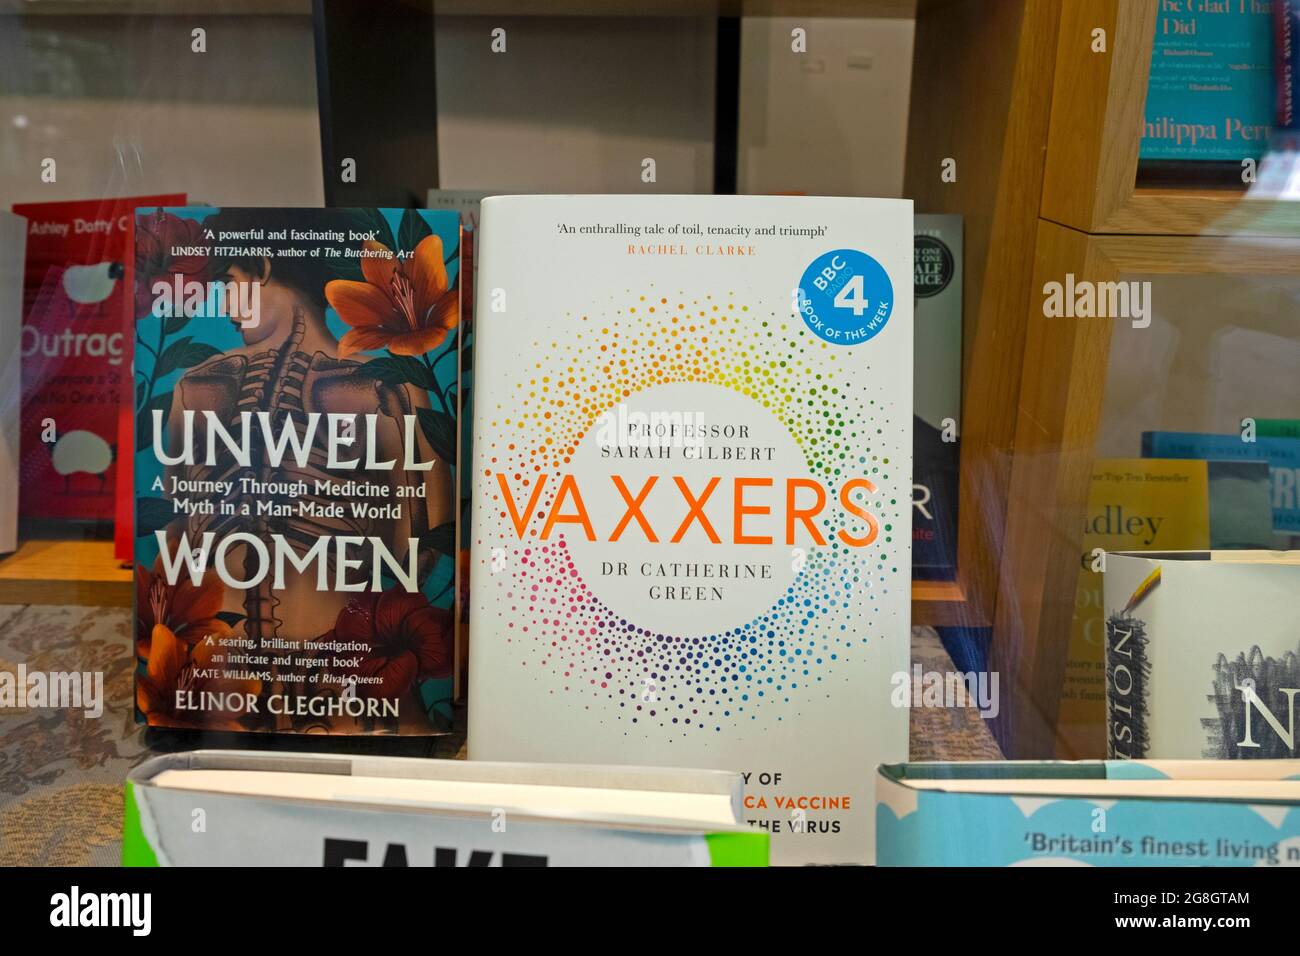 Vaxxers book front cover by authors Sarah Gilbert and Catherine Green and Unwell Women by author Elinor Cleghorn in Waterstones bookshop window UK Stock Photo